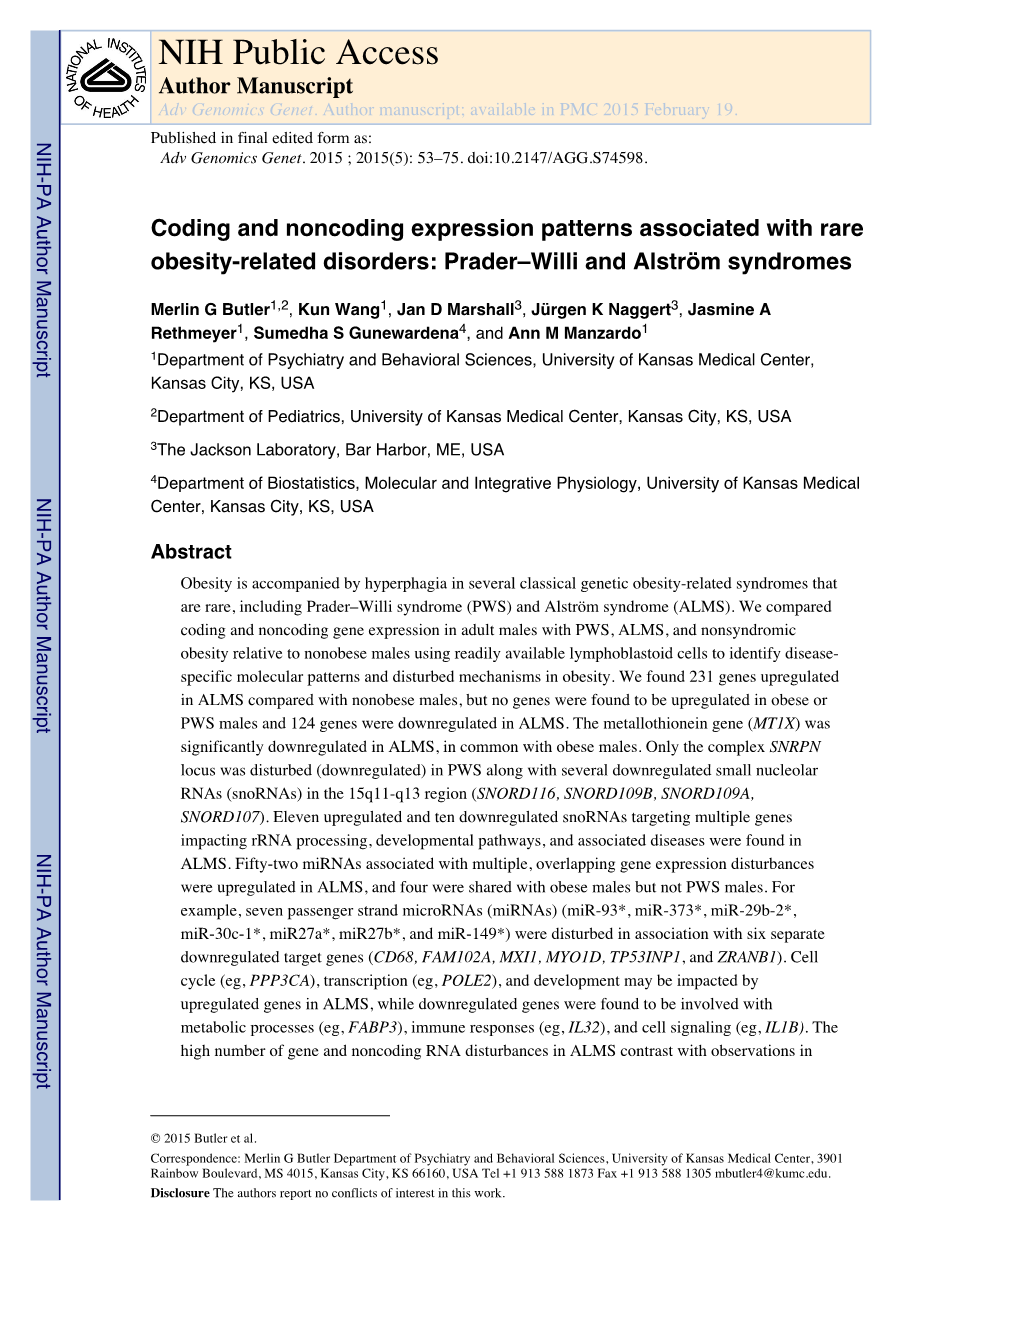 Coding and Noncoding Expression Patterns Associated with Rare Obesity-Related Disorders: Prader–Willi and Alström Syndromes